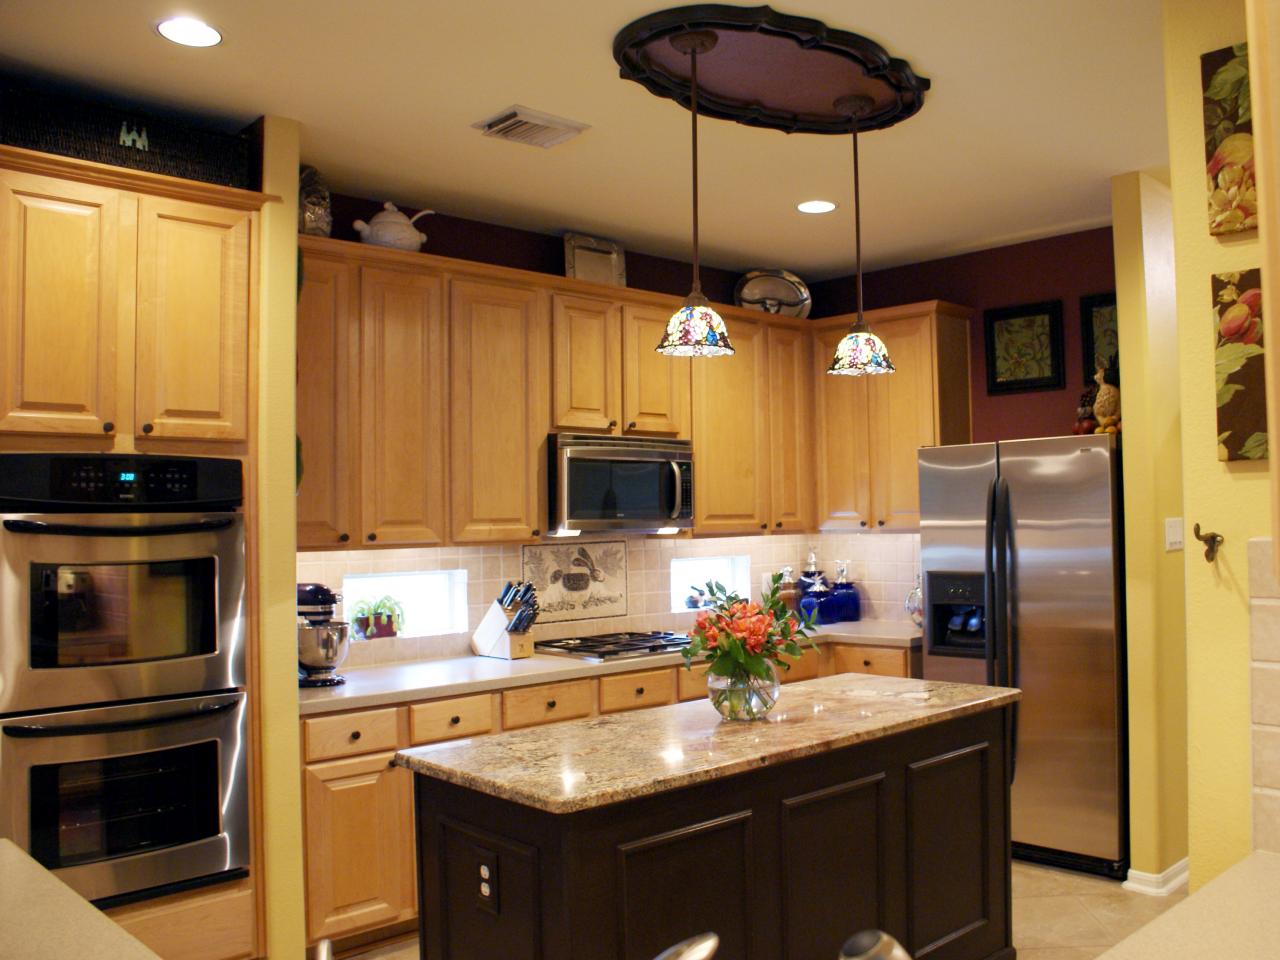 Cabinets Should You Replace Or Reface, What Color Should My Kitchen Island Be